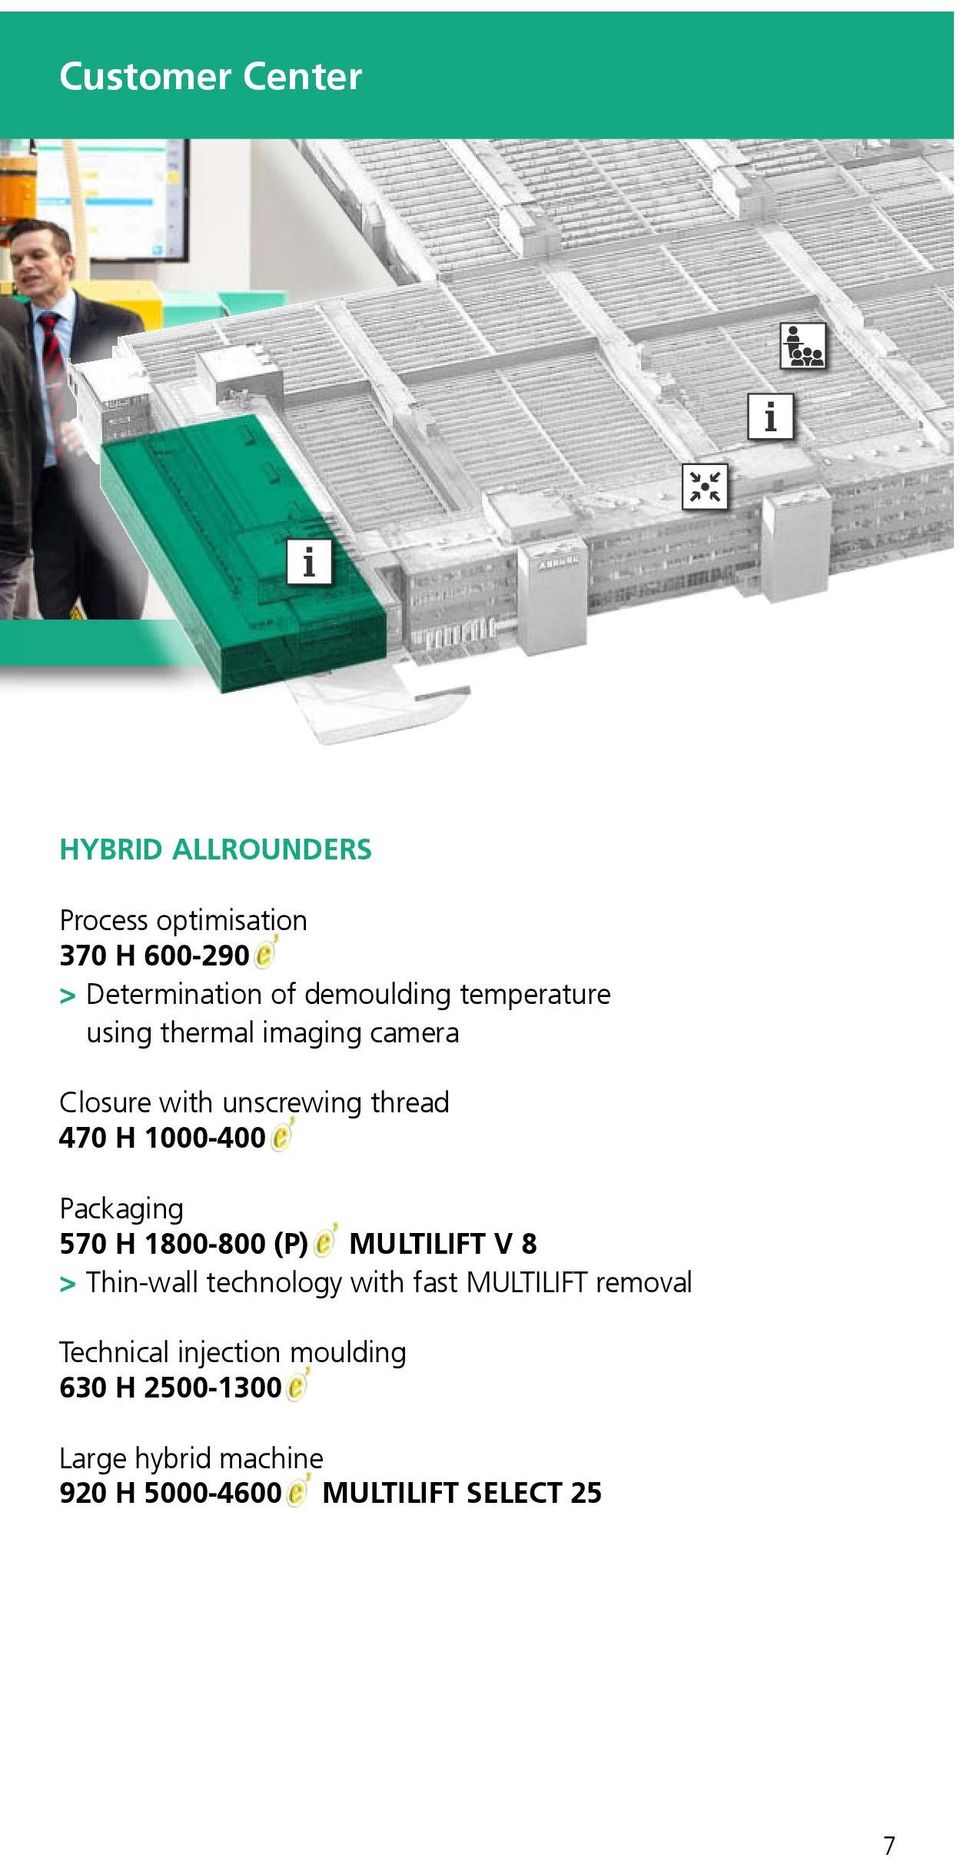 1000-400 Packaging 570 H 1800-800 (P) MULTILIFT V 8 > Thin-wall technology with fast MULTILIFT